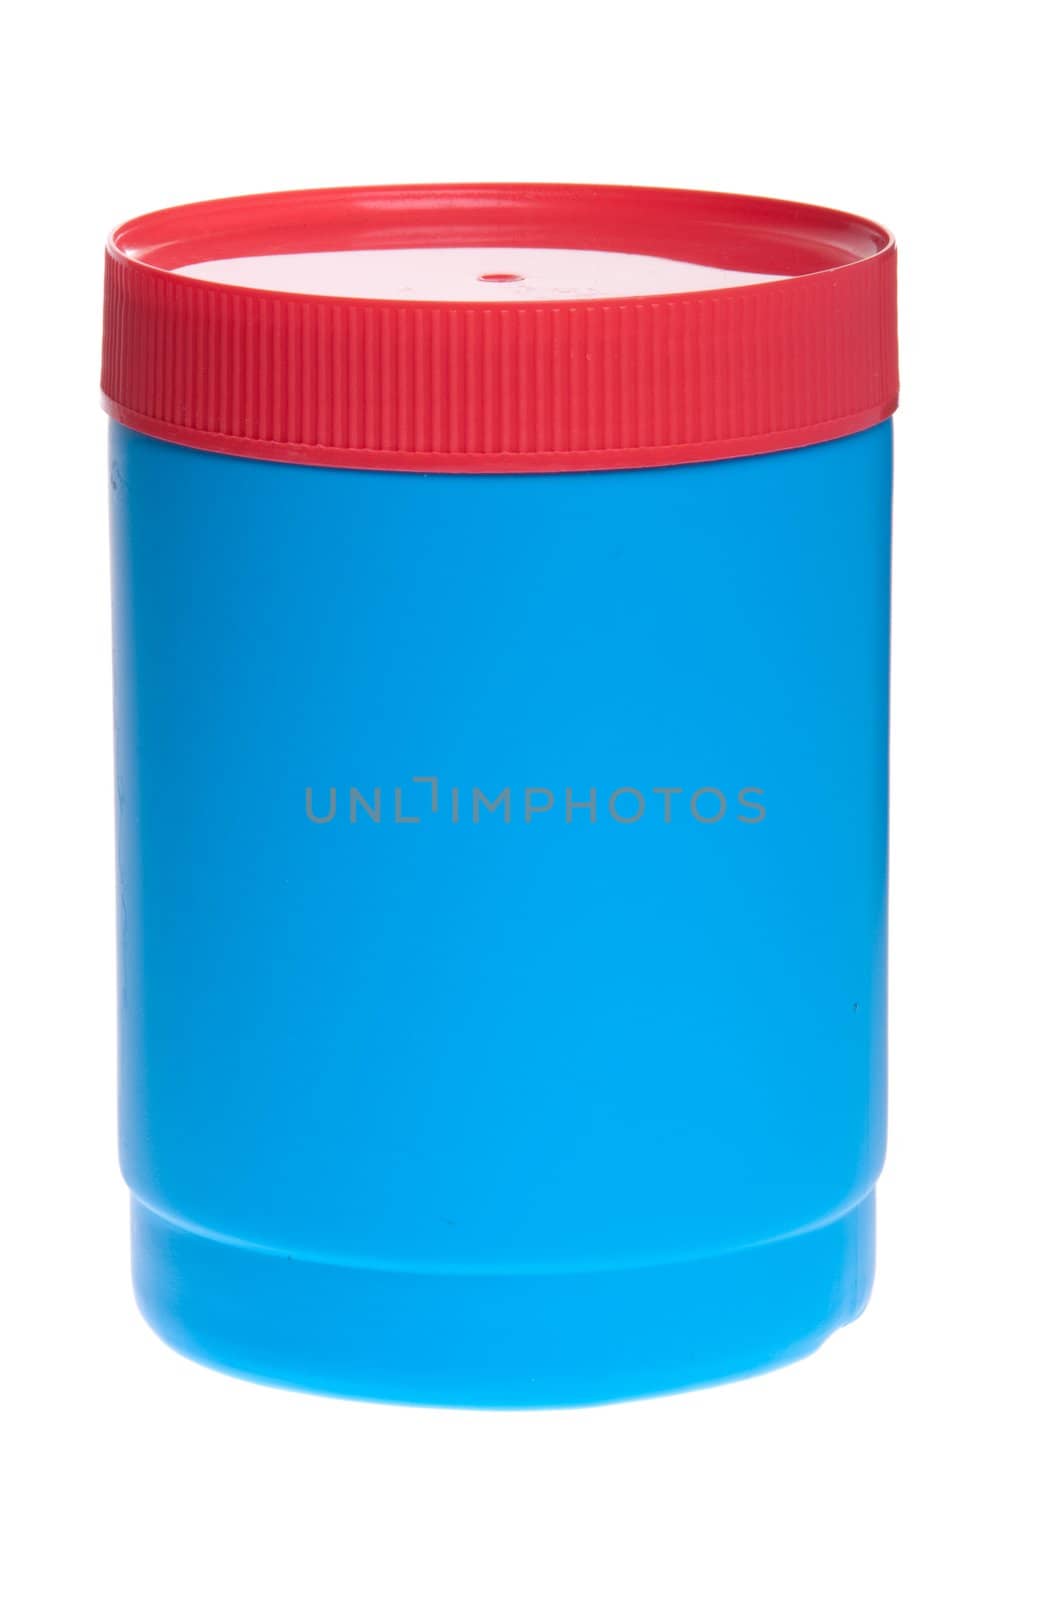 blue plastic canister isolated on white background